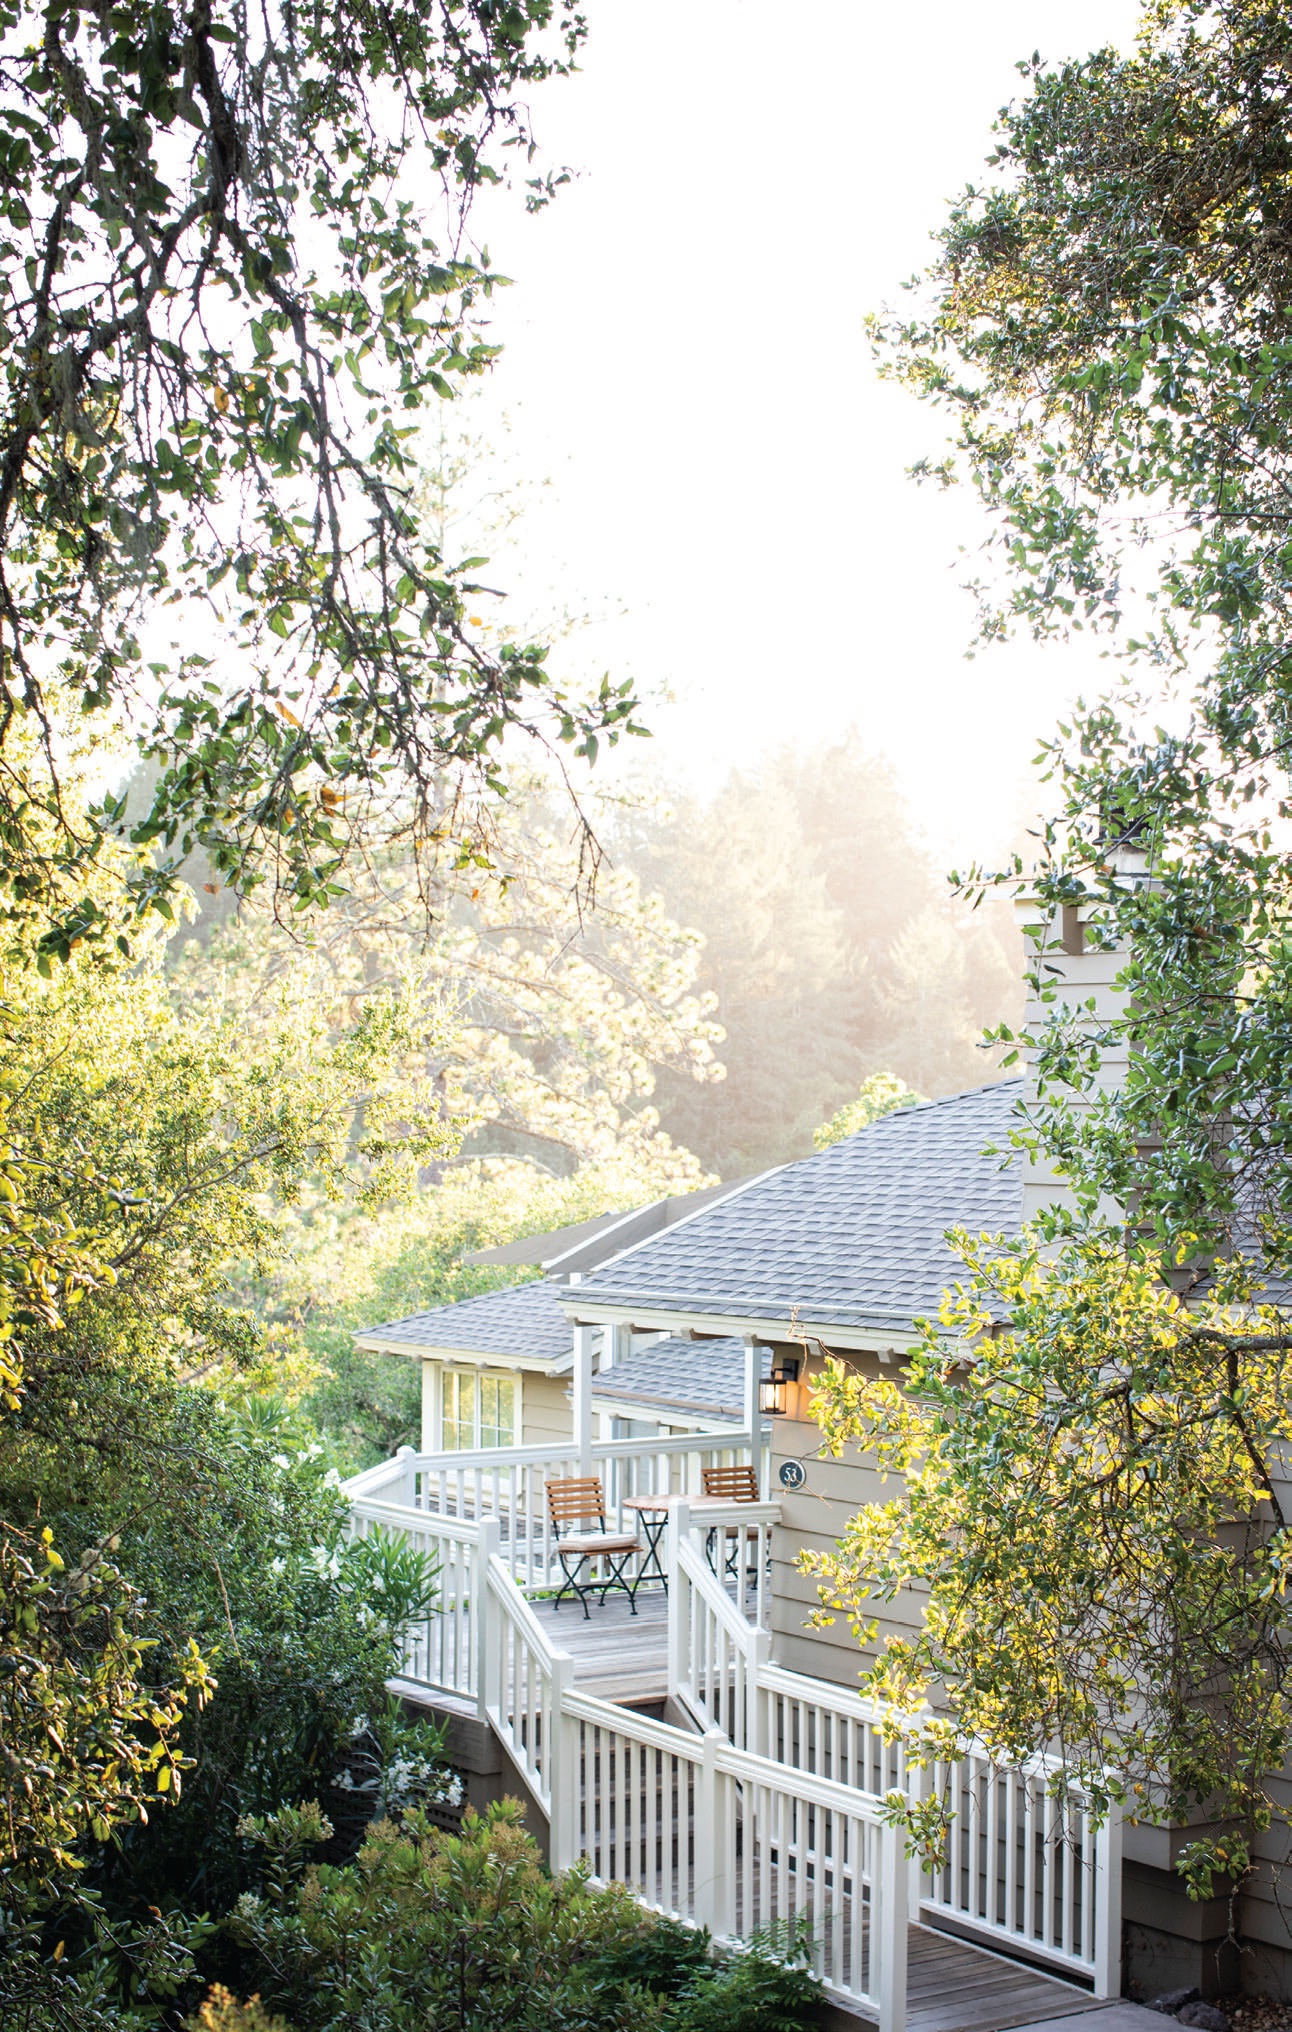 Meadowood Napa Valley offers an unmatched wine country escape. PHOTO COURTESY OF MEADOWOOD NAPA VALLEY